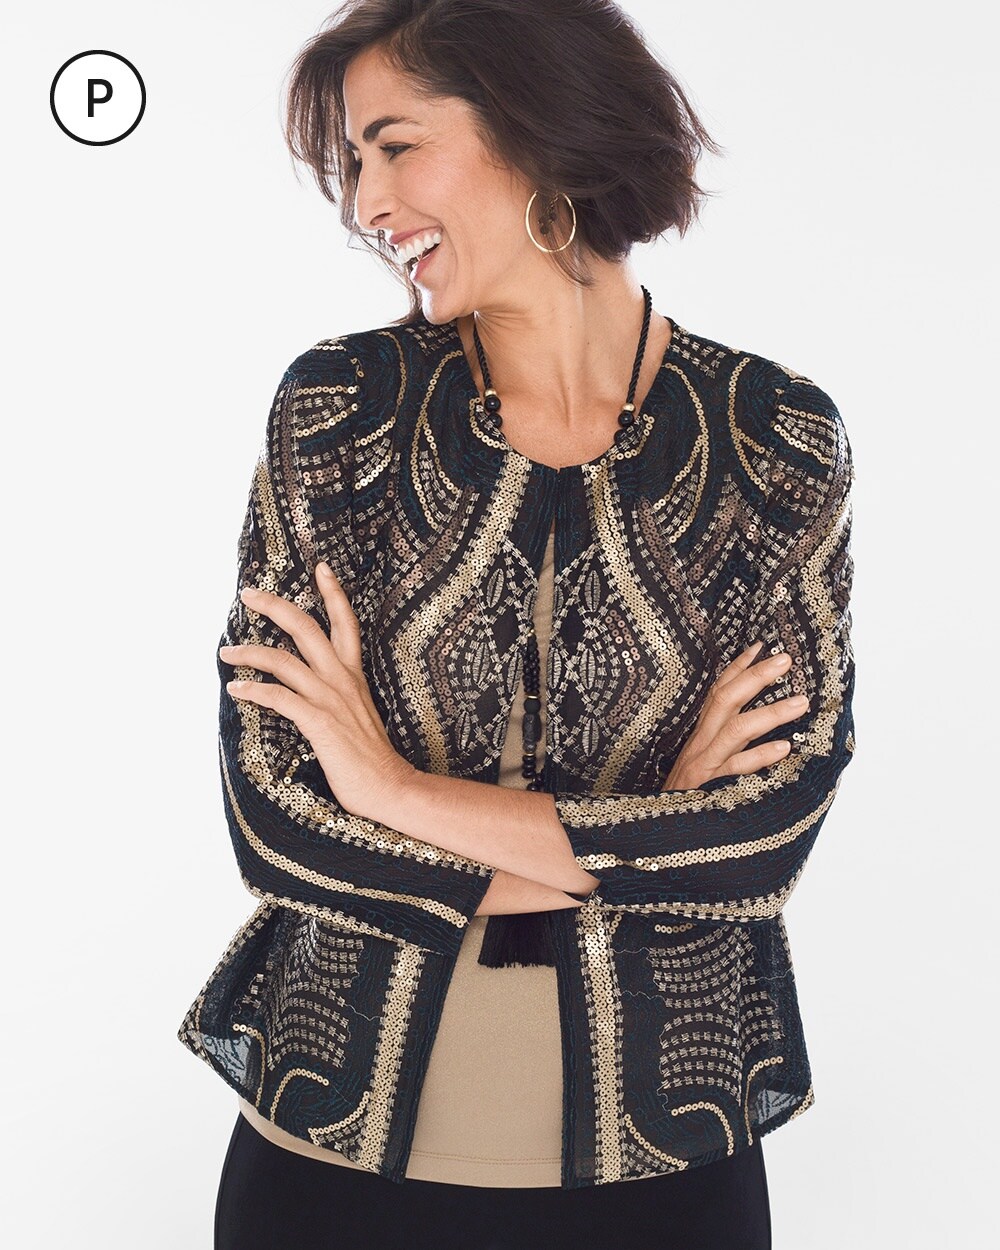 Petite Travelers Collection Black and Gold Sequin Jacket